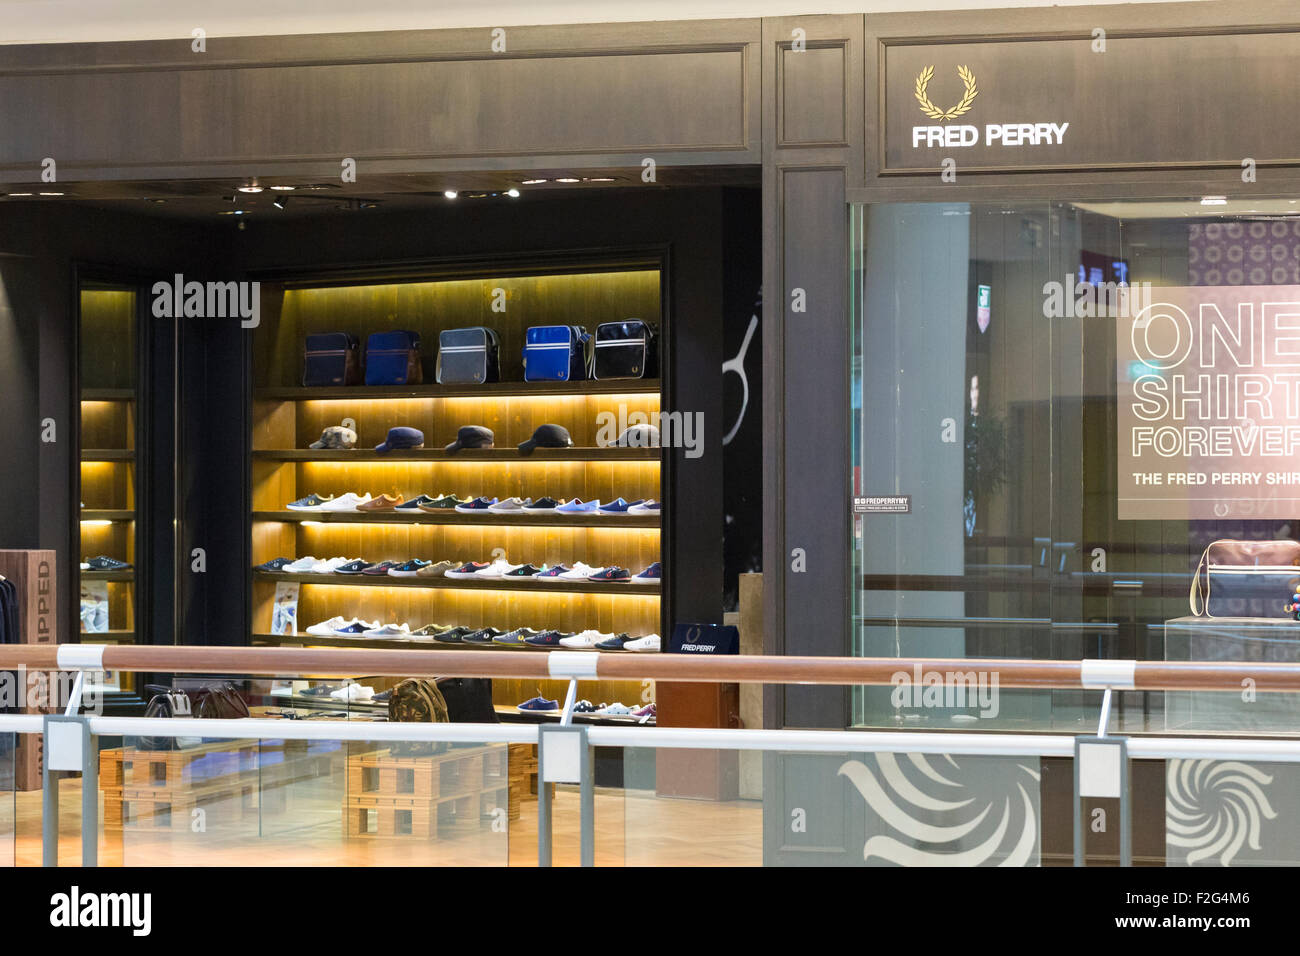 Fred Perry Shop Stockfoto